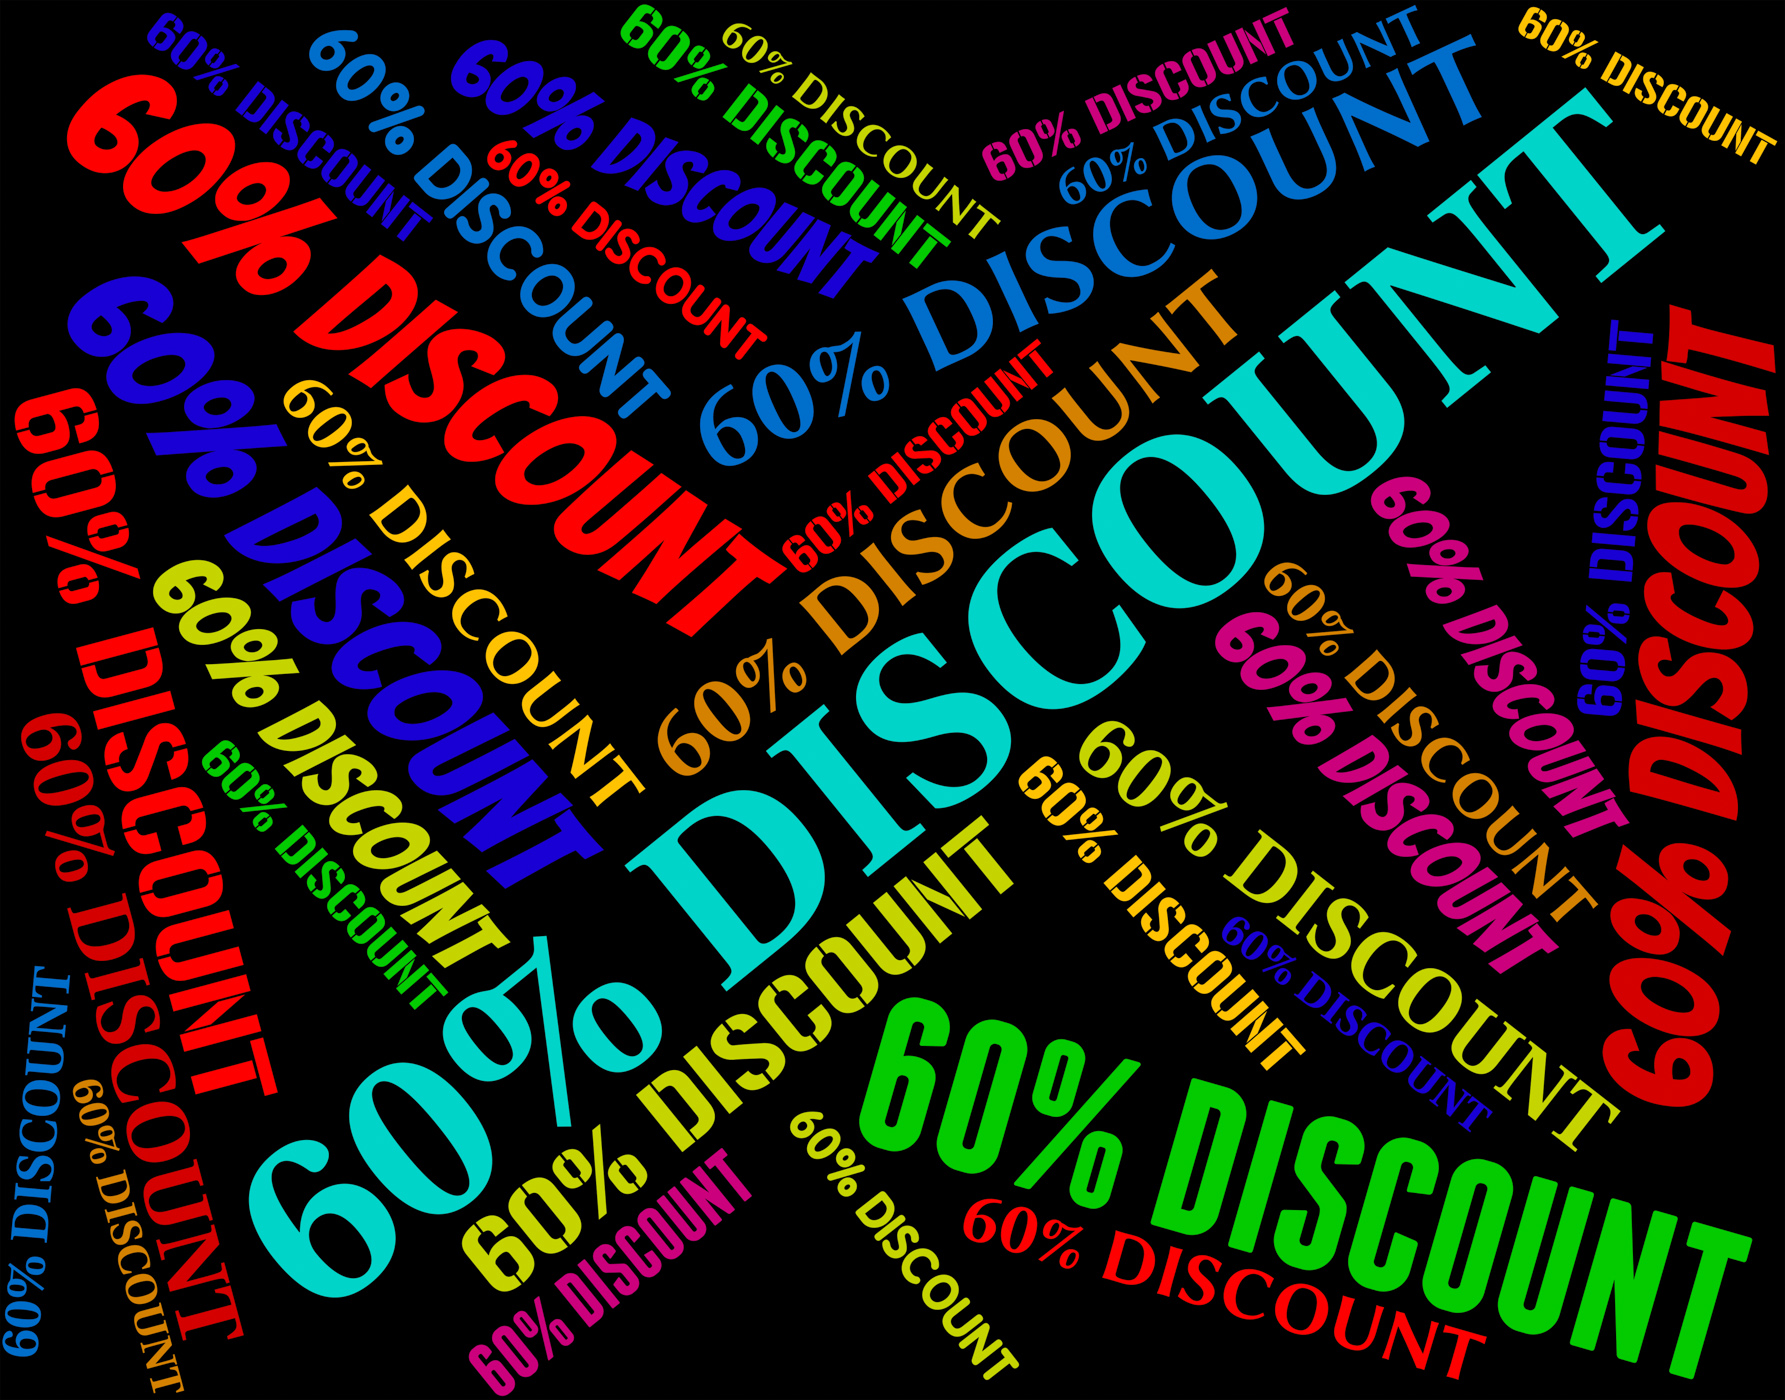 Sixty percent off shows reduction word and sales photo